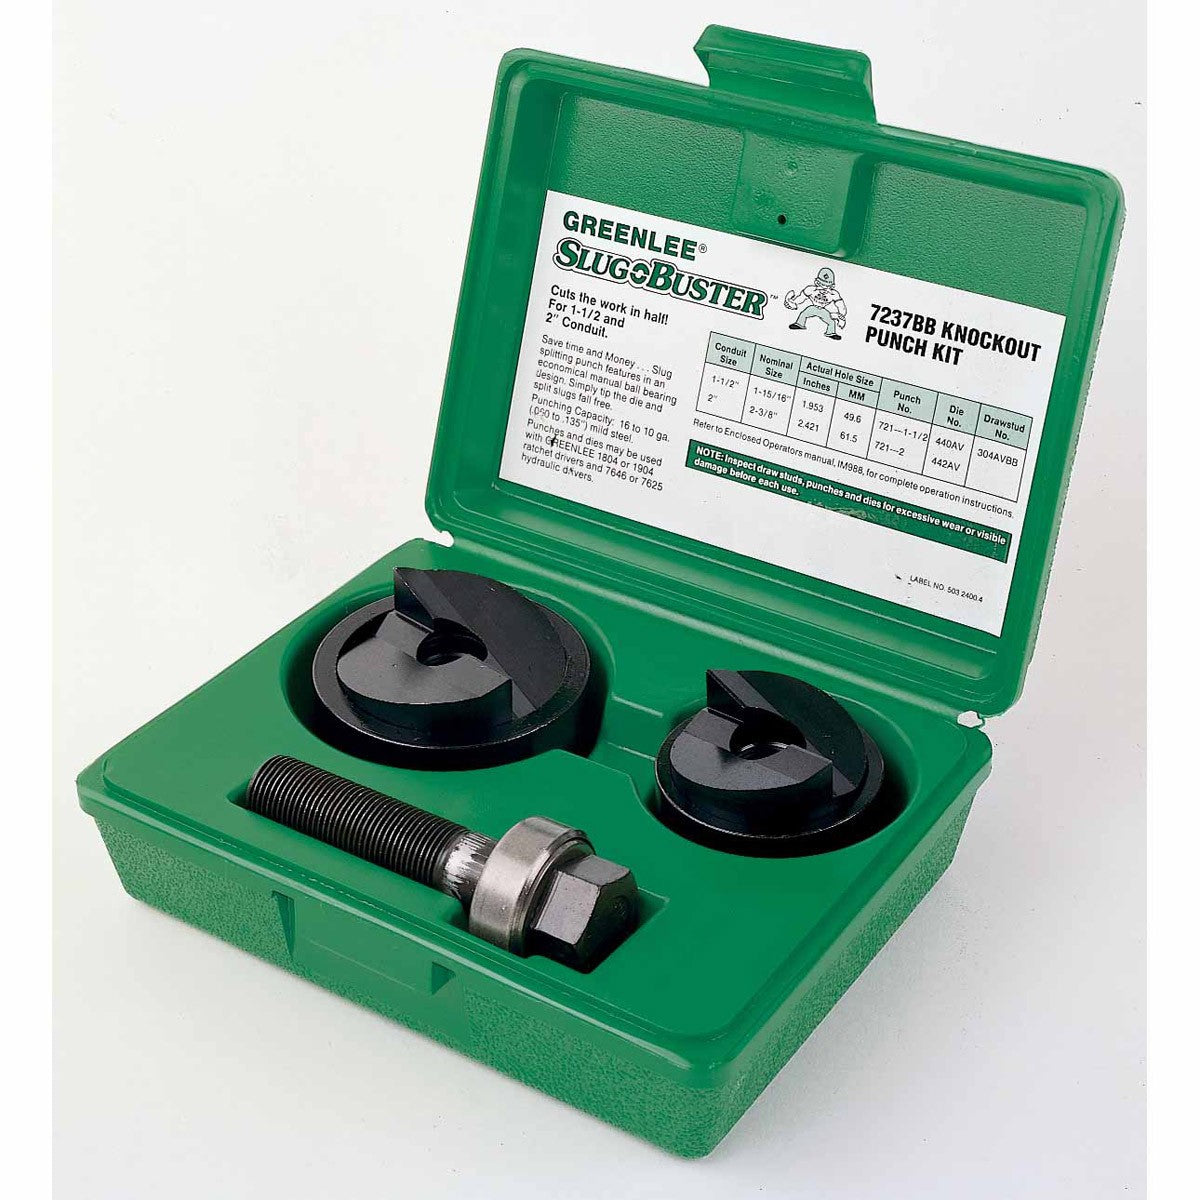 Greenlee 7237BB 1-1/2" and 2" Conduit Size Manual Slug-Buster Knockout Punch Kit